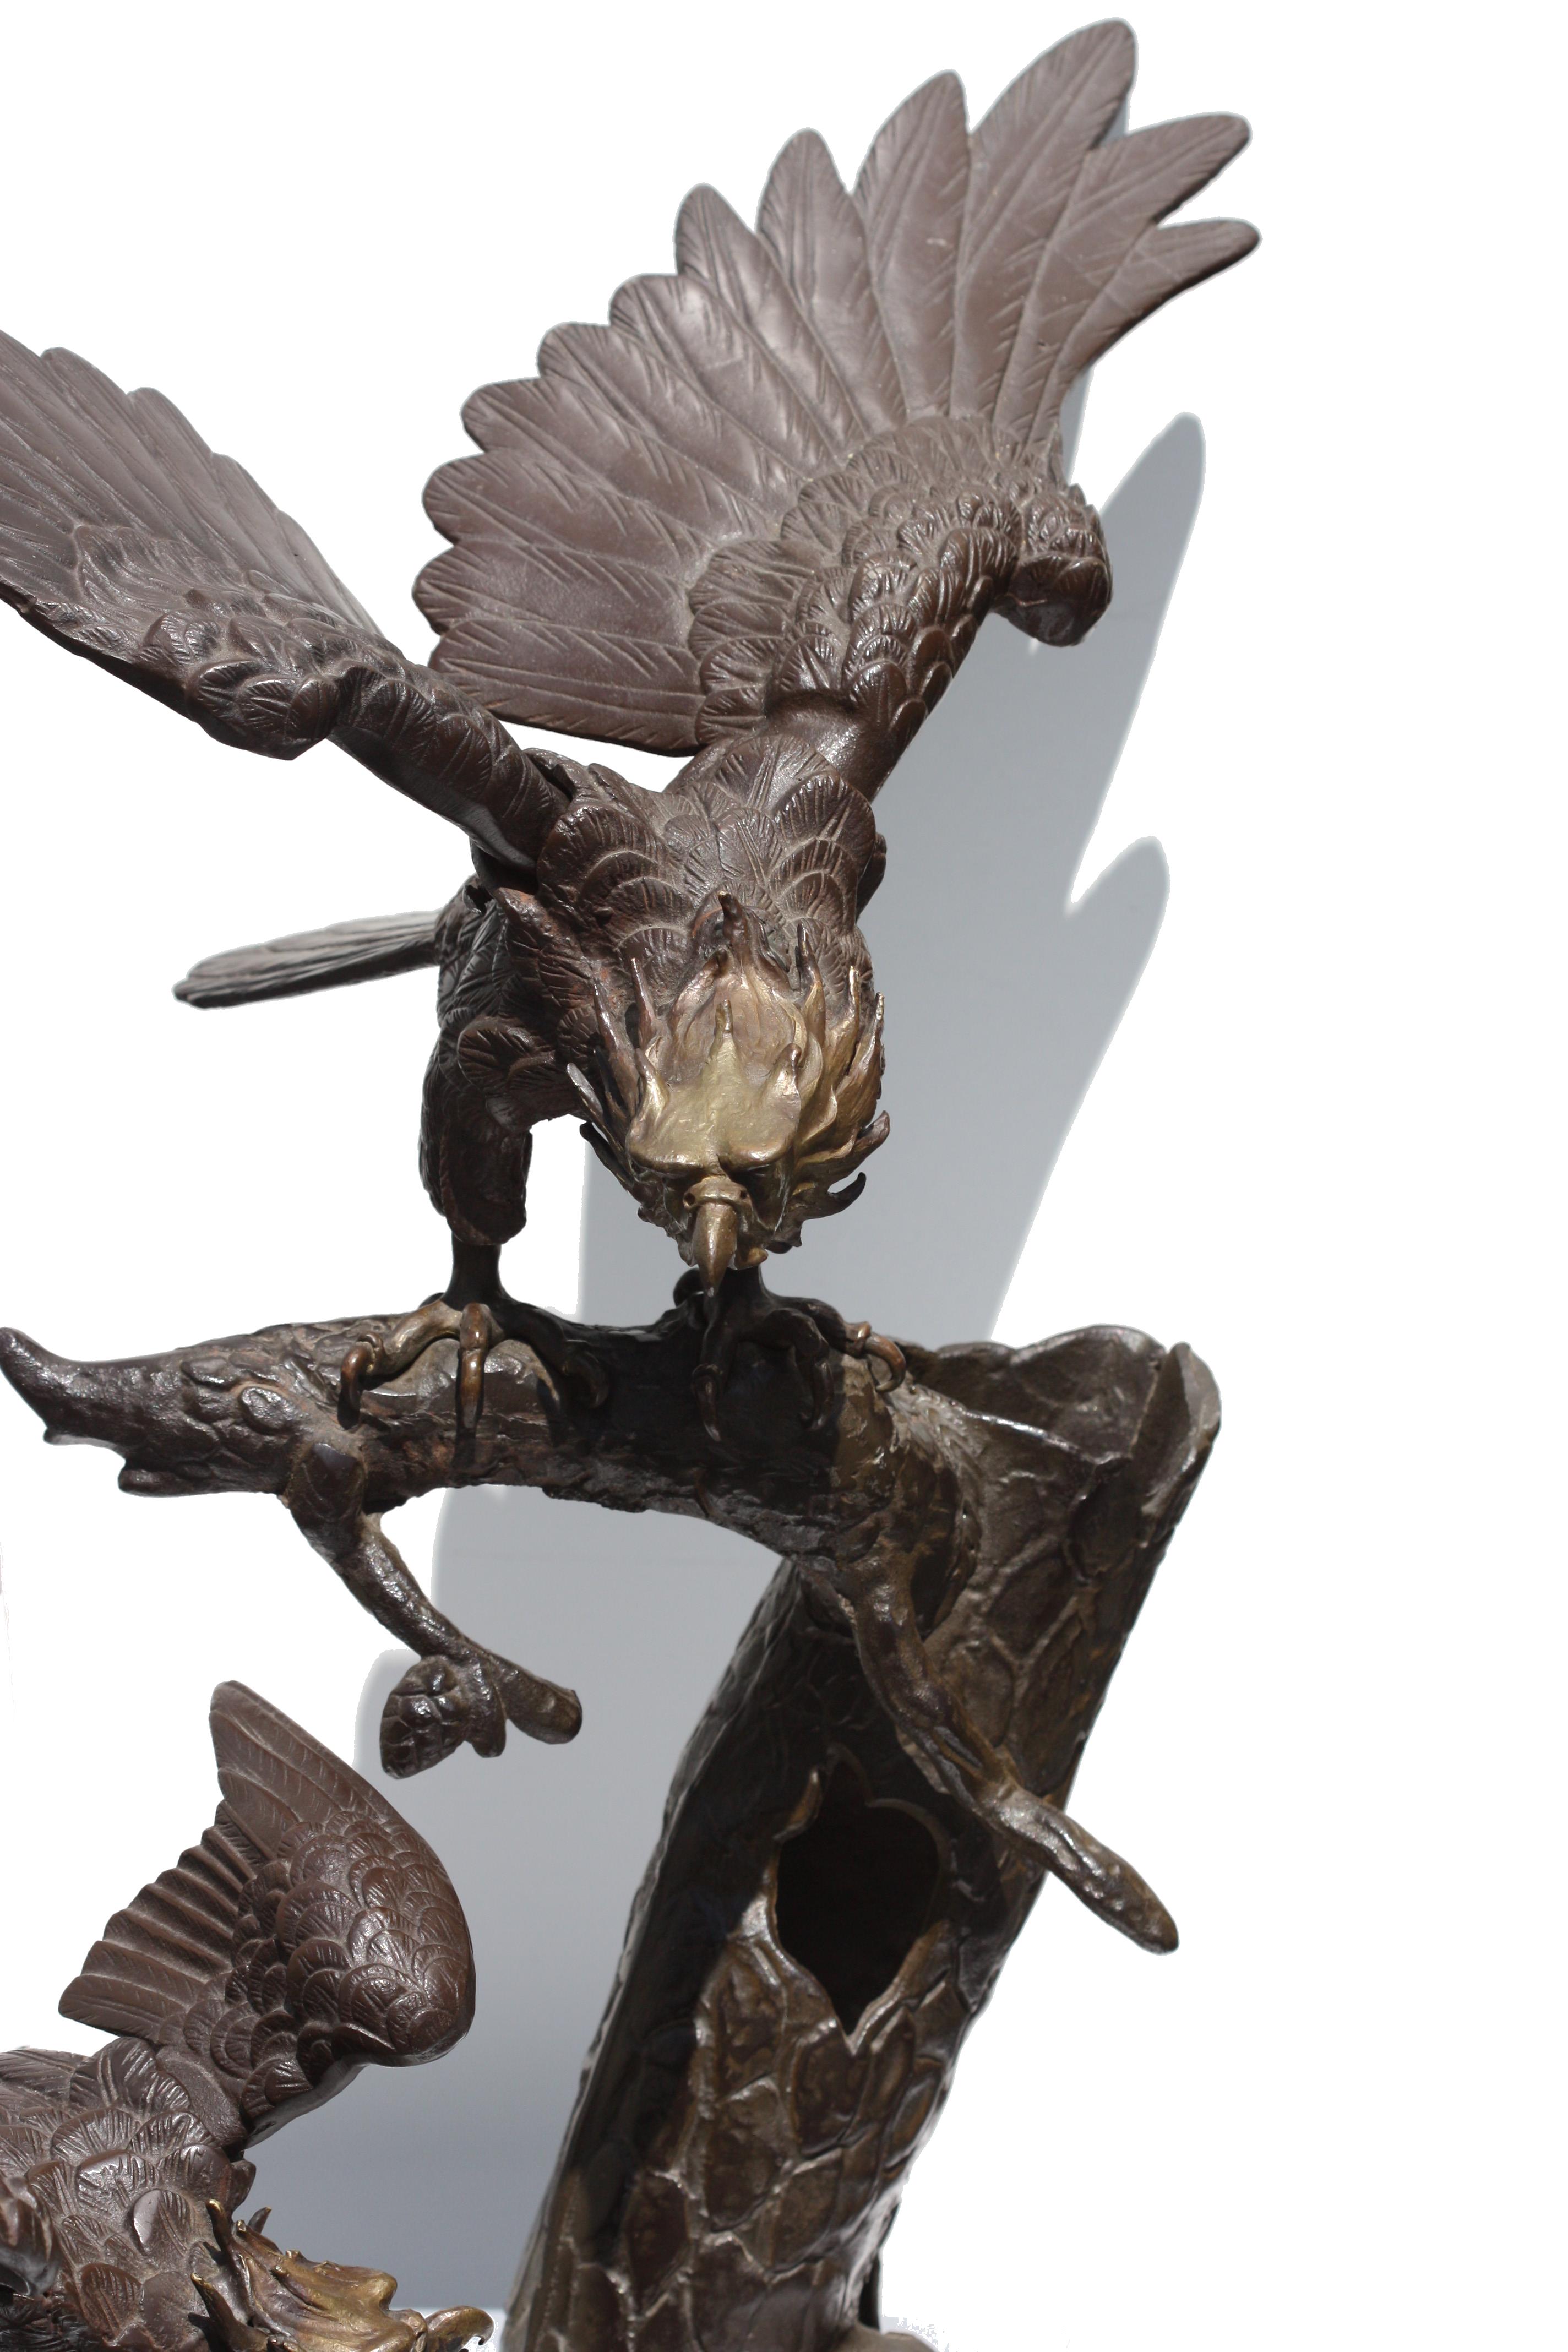 
Large Japanese Patinated Bronze and Iron Eagle Sculpture Group
Meiji Period. Representing two eagles on a tree stump, with gilt highlights.
Height is 26 in. Width 34 in.